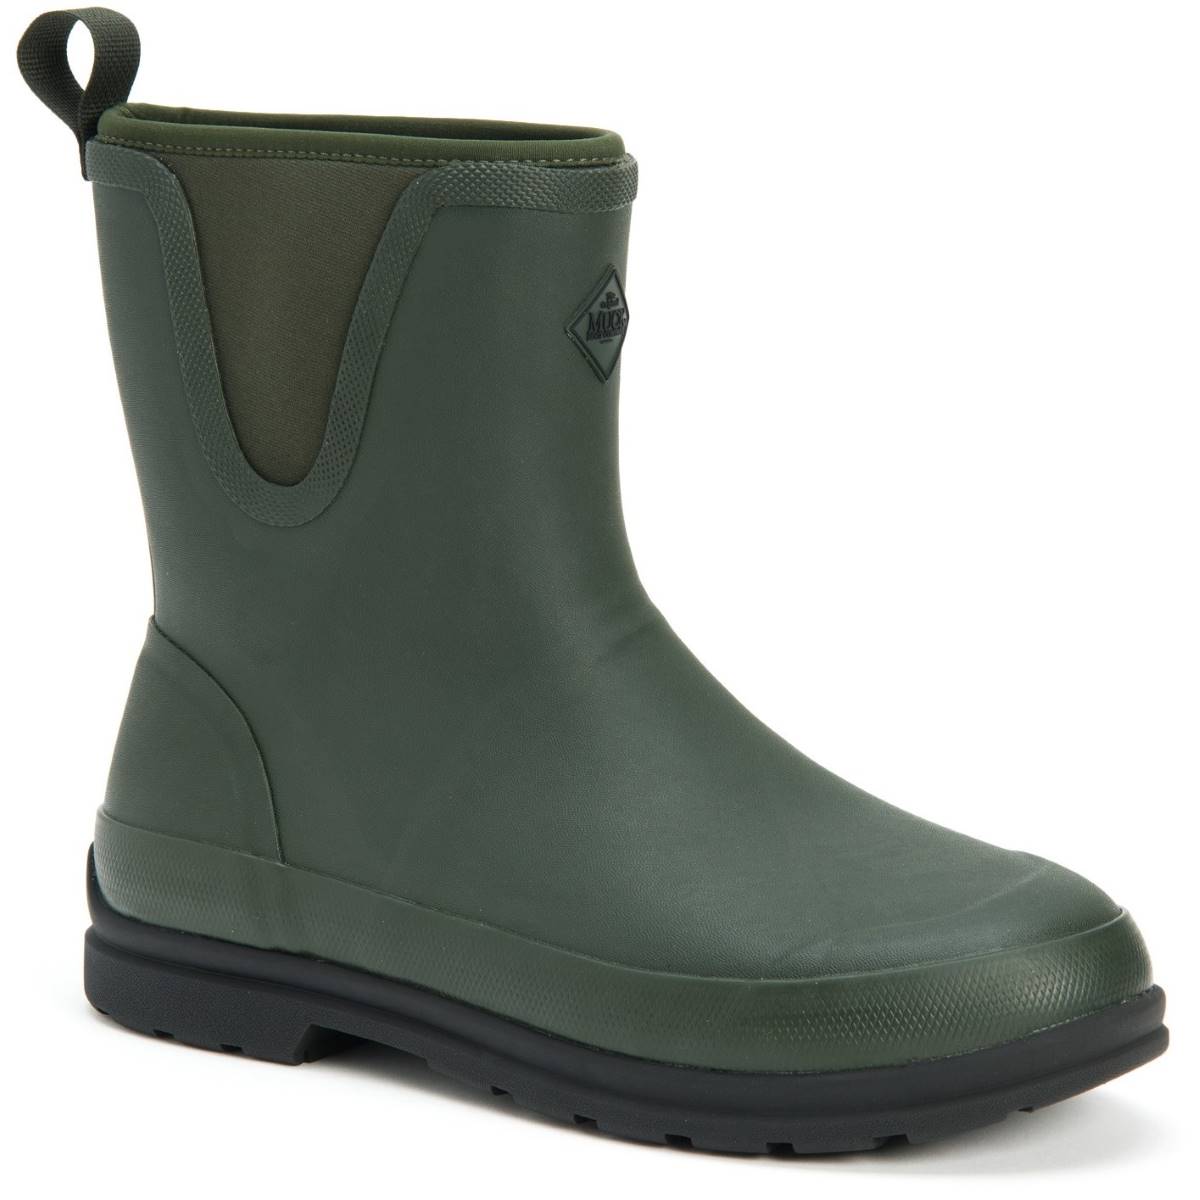 Muck Boots Originals Pull On Mid Green Mens boots OMM-300 in a Plain Rubber in Size 14